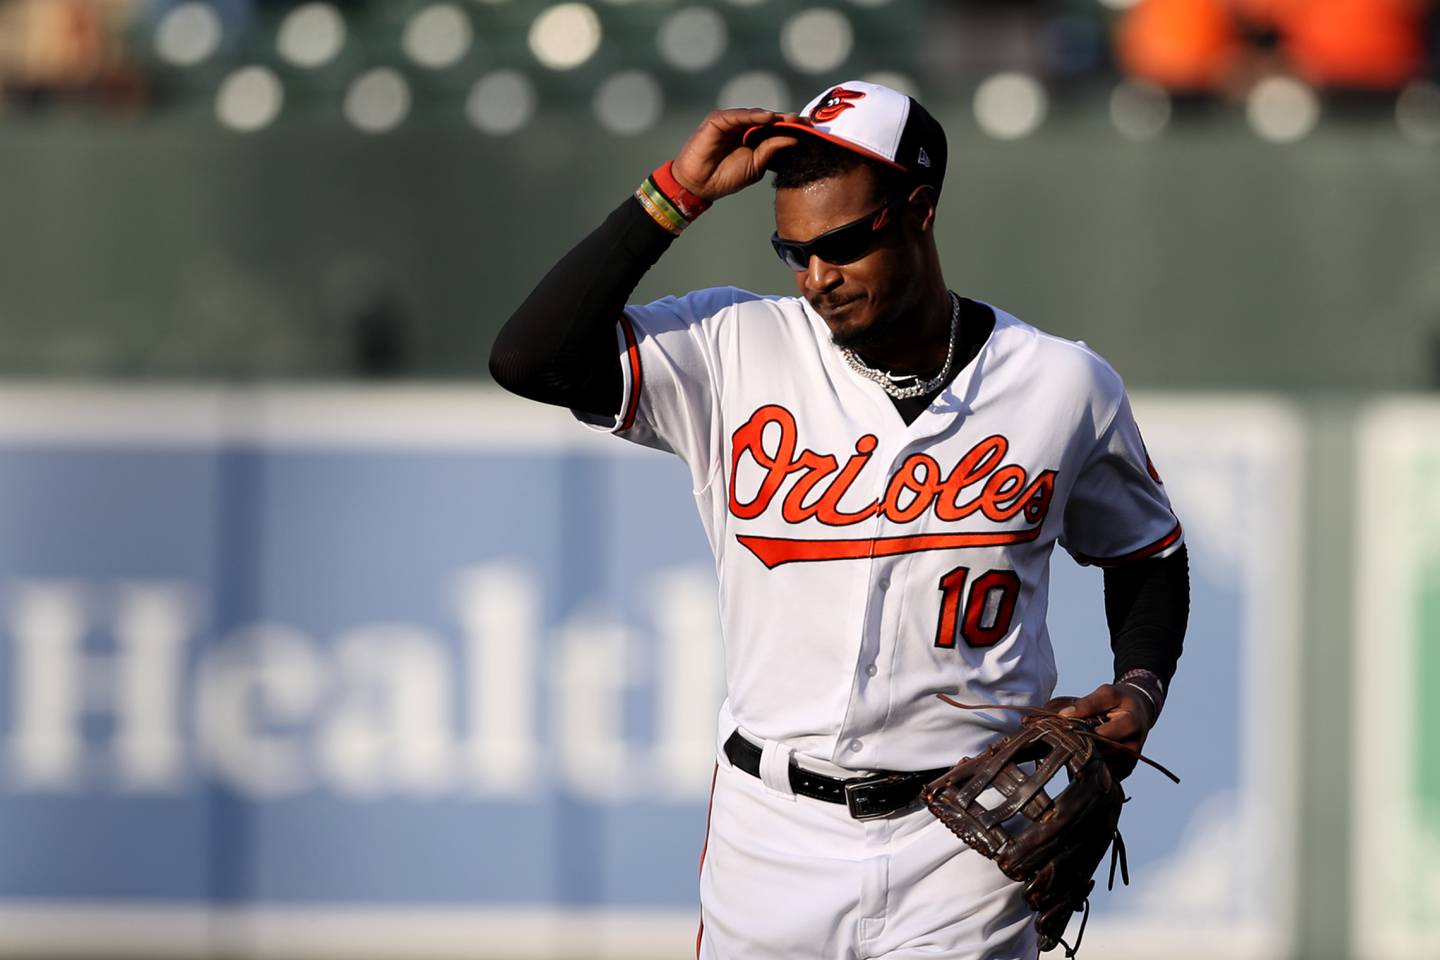 BALTIMORE, MD - SEPTEMBER 30: Adam Jones #10 of the Baltimore Orioles waves to crowd after being pulled from the game in the ninth inning against the Houston Astros at Oriole Park at Camden Yards on September 30, 2018 in Baltimore, Maryland. (Photo by Rob Carr/Getty Images)